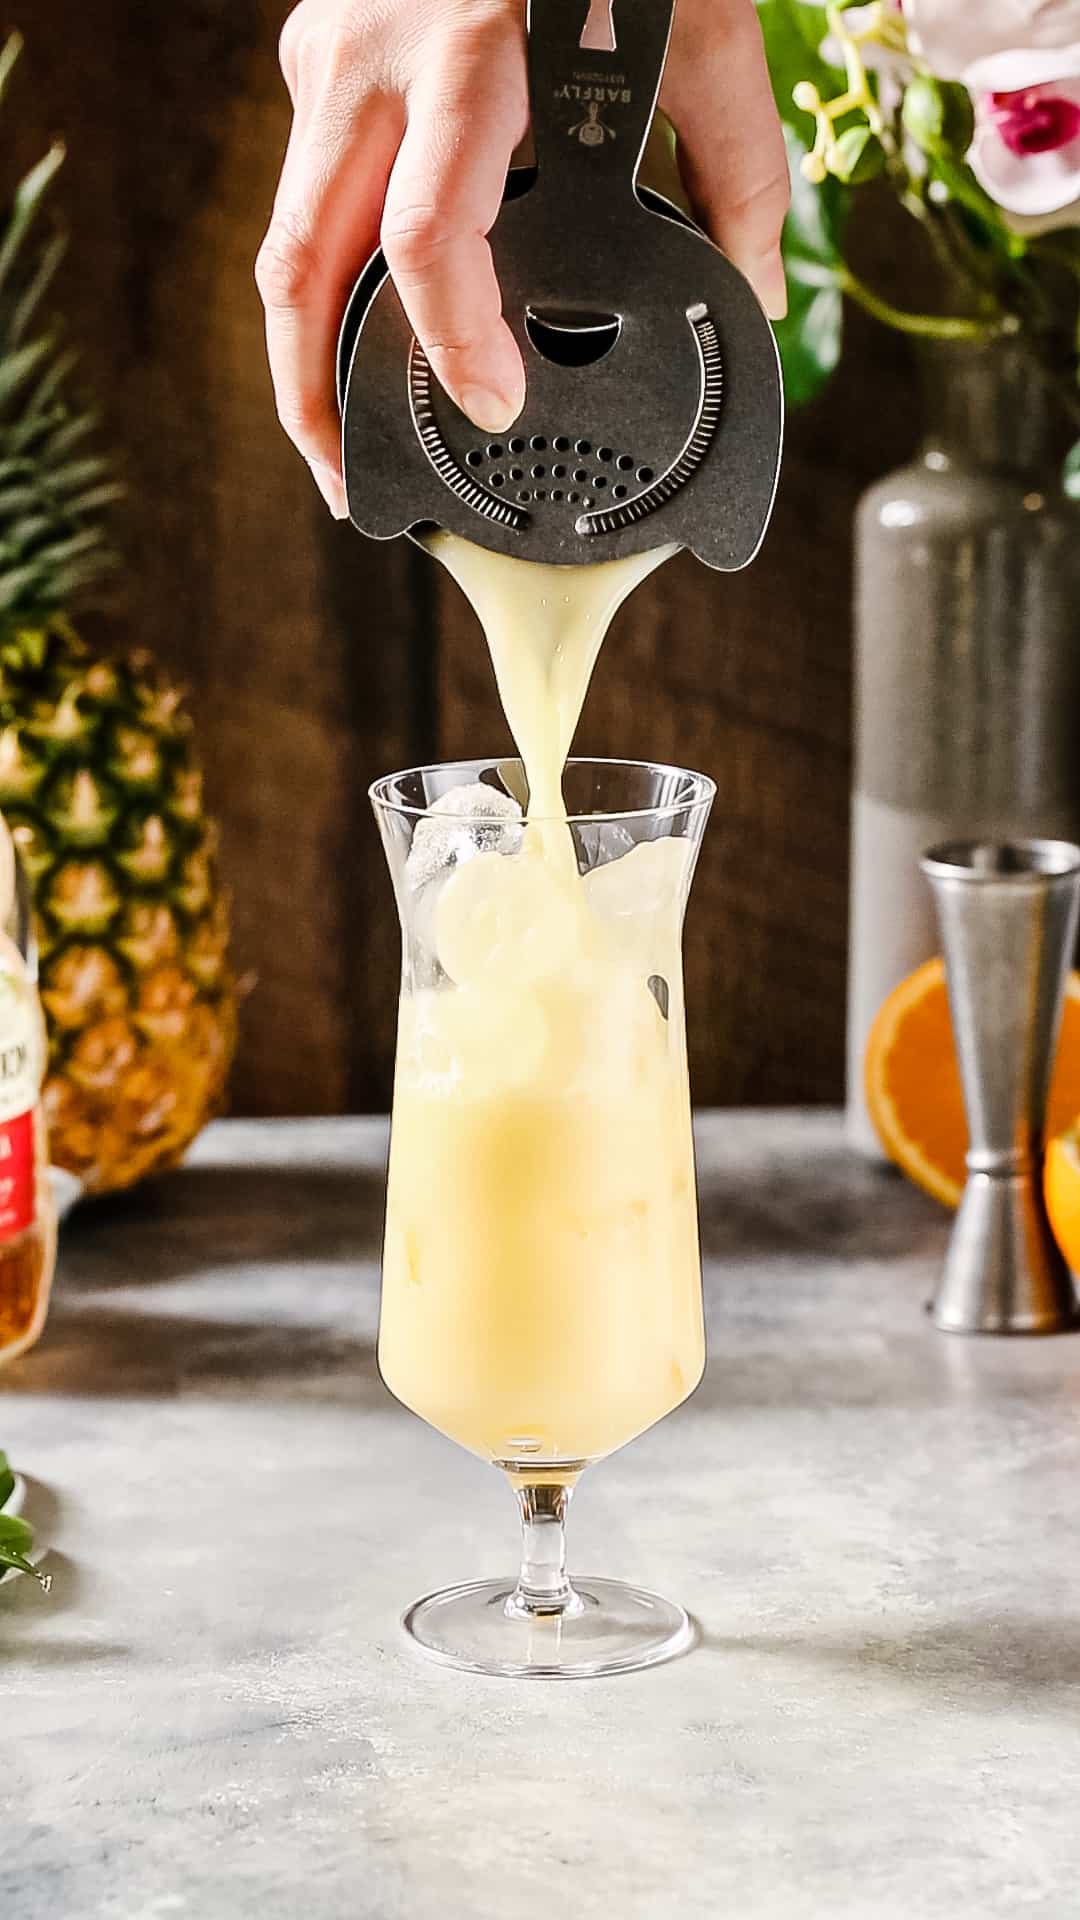 Hand using a gray cocktail strainer to strain the yellow drink into a hurricane glass filled with ice.